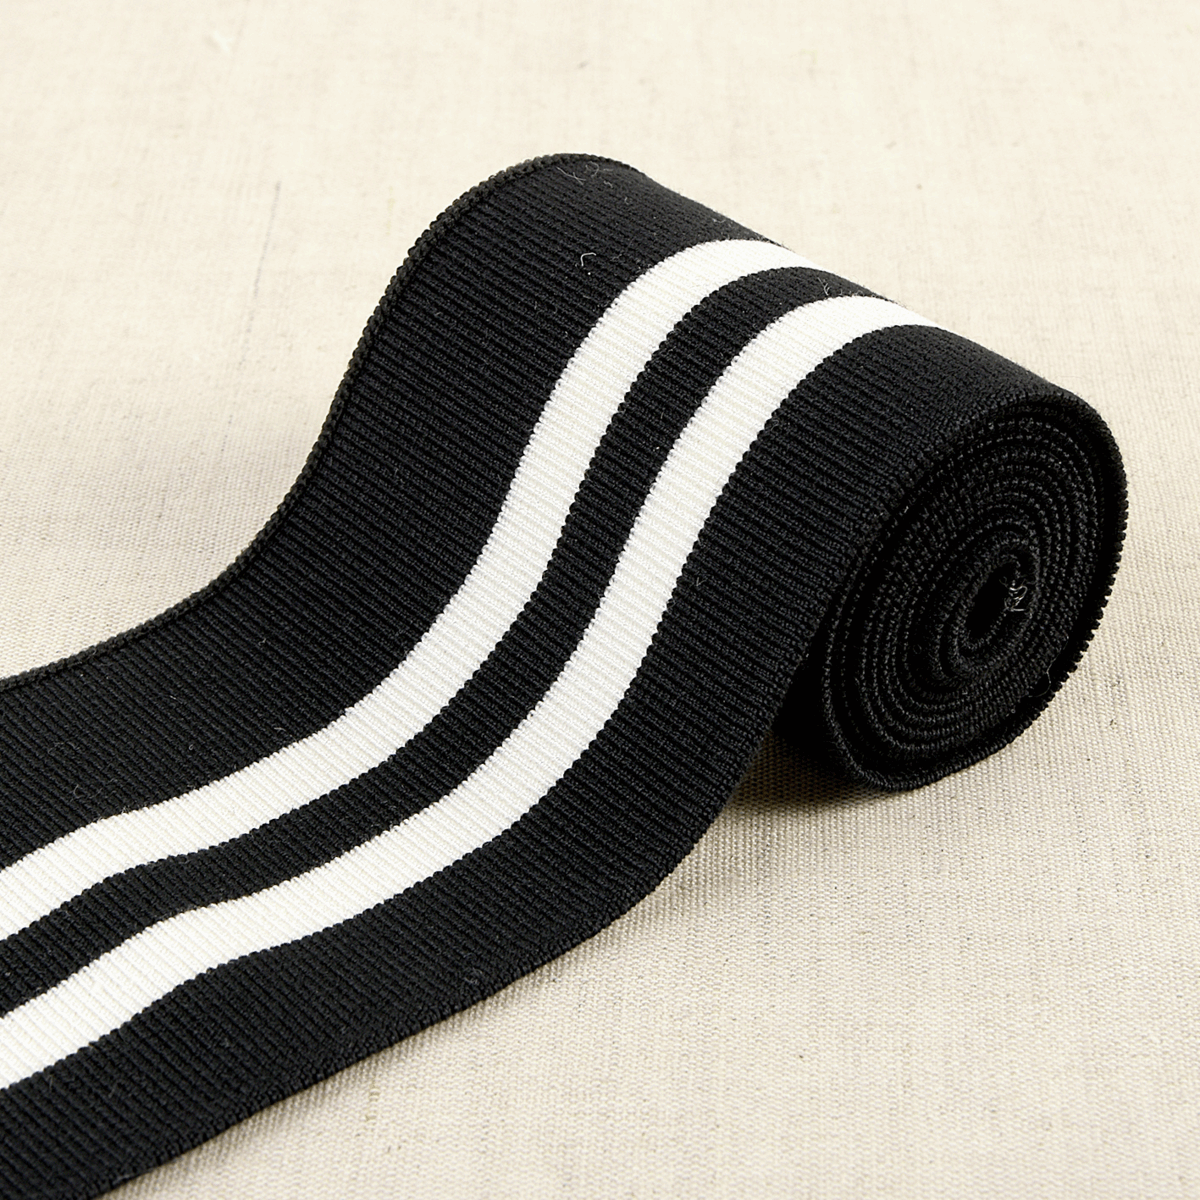 Double Stripe Cuffing By Stephanoise. Cotton Knit Fabric: cuffs and waistbands.